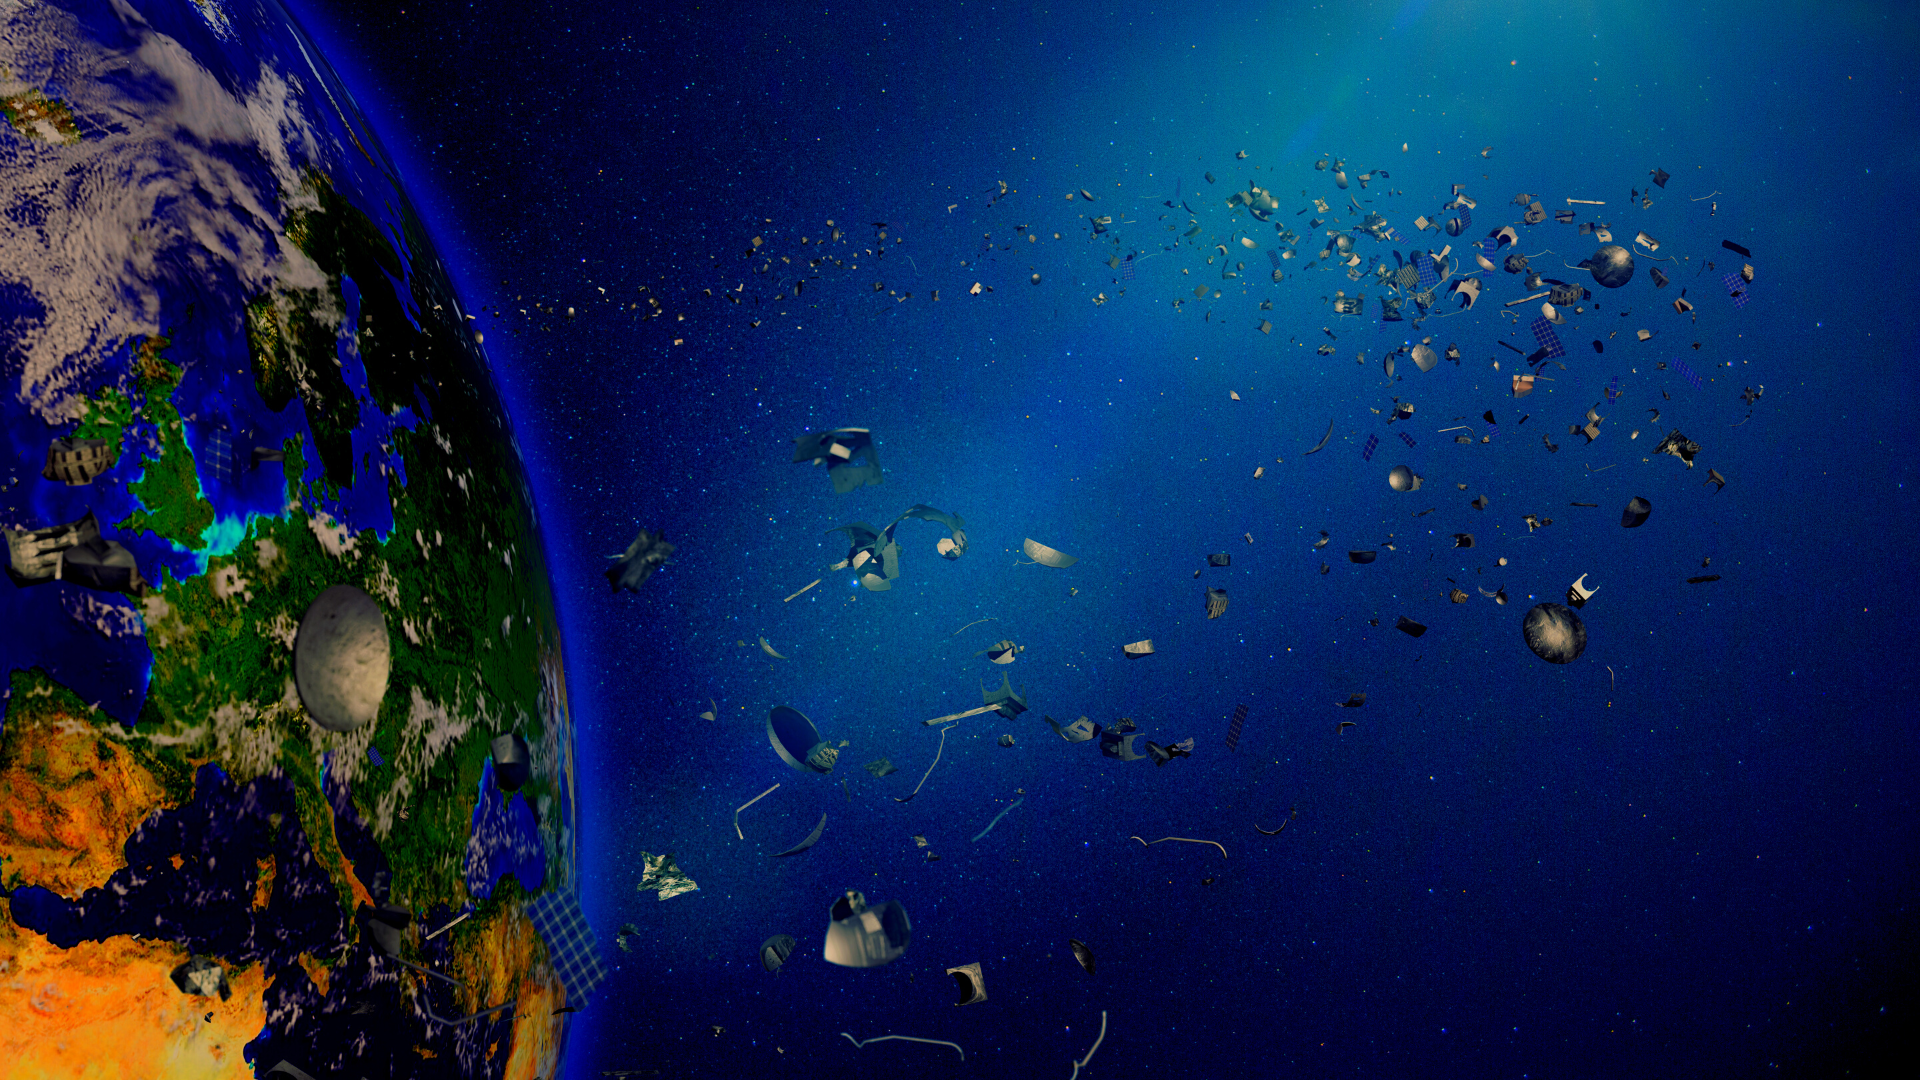 The UK’s Plans to Clean up Space Debris